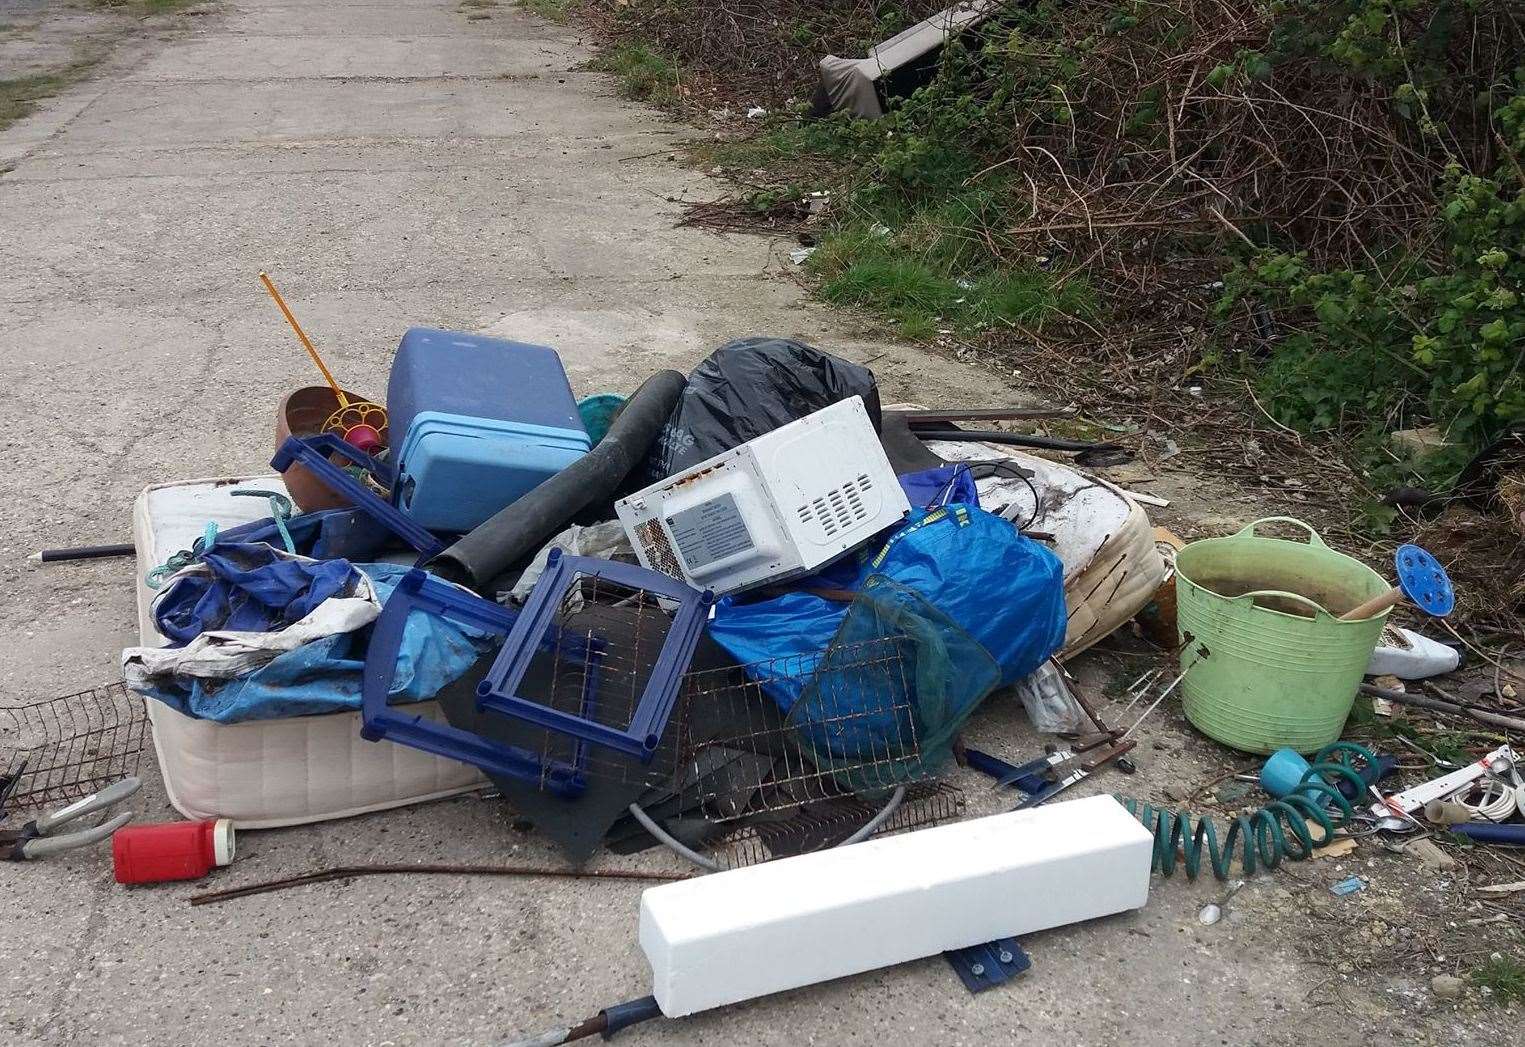 There have been more than 2,000 cases of fly-tipping reported in Swale this year, including this pile of waste left near Sheerness canal